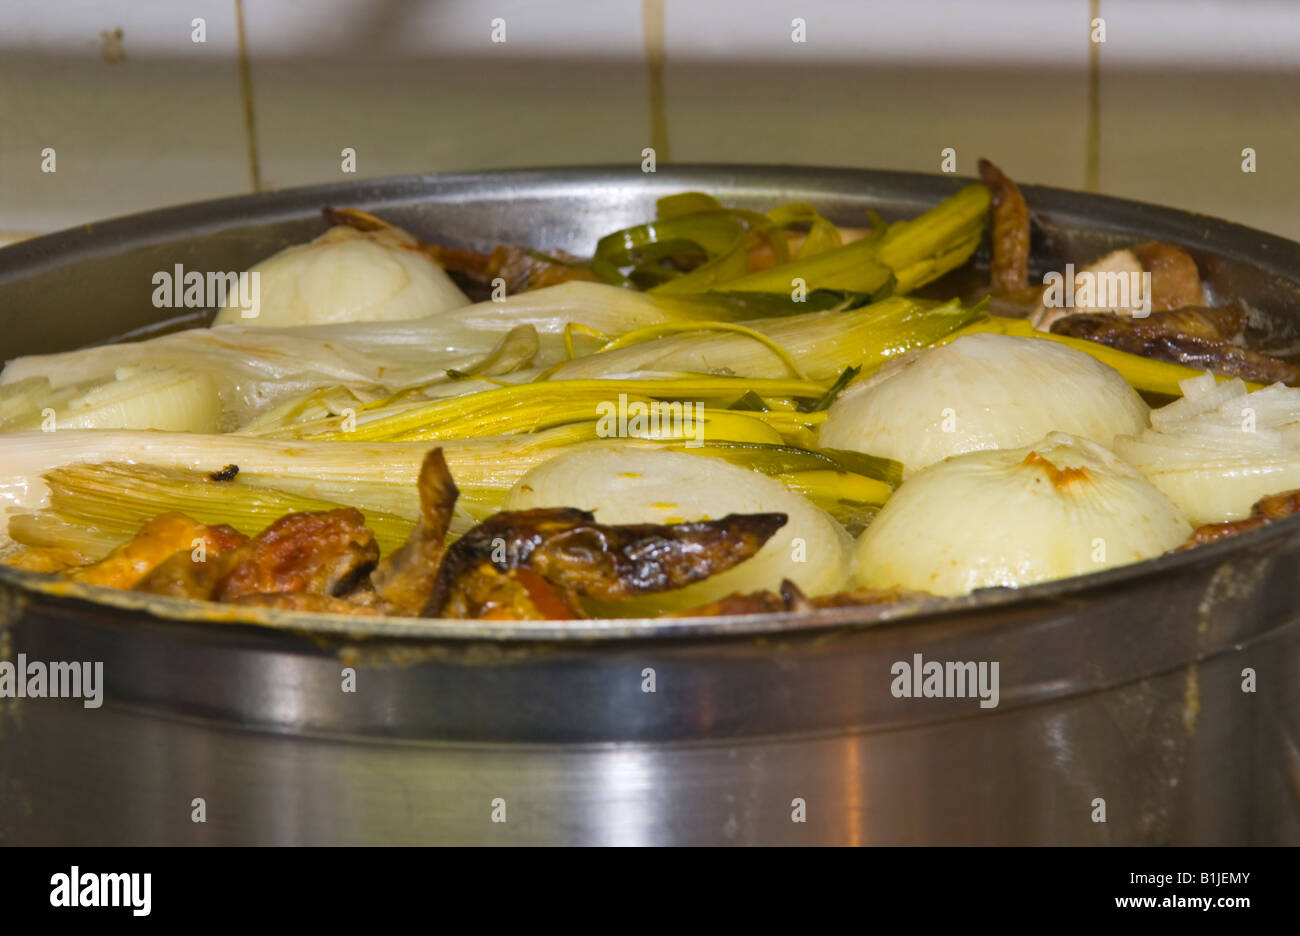 Pan of vegetable stock simmering on the stove at The Walnut Tree Restaurant Llanddewi Skirrid Abergavenny Monmouthshire Wales UK Stock Photo